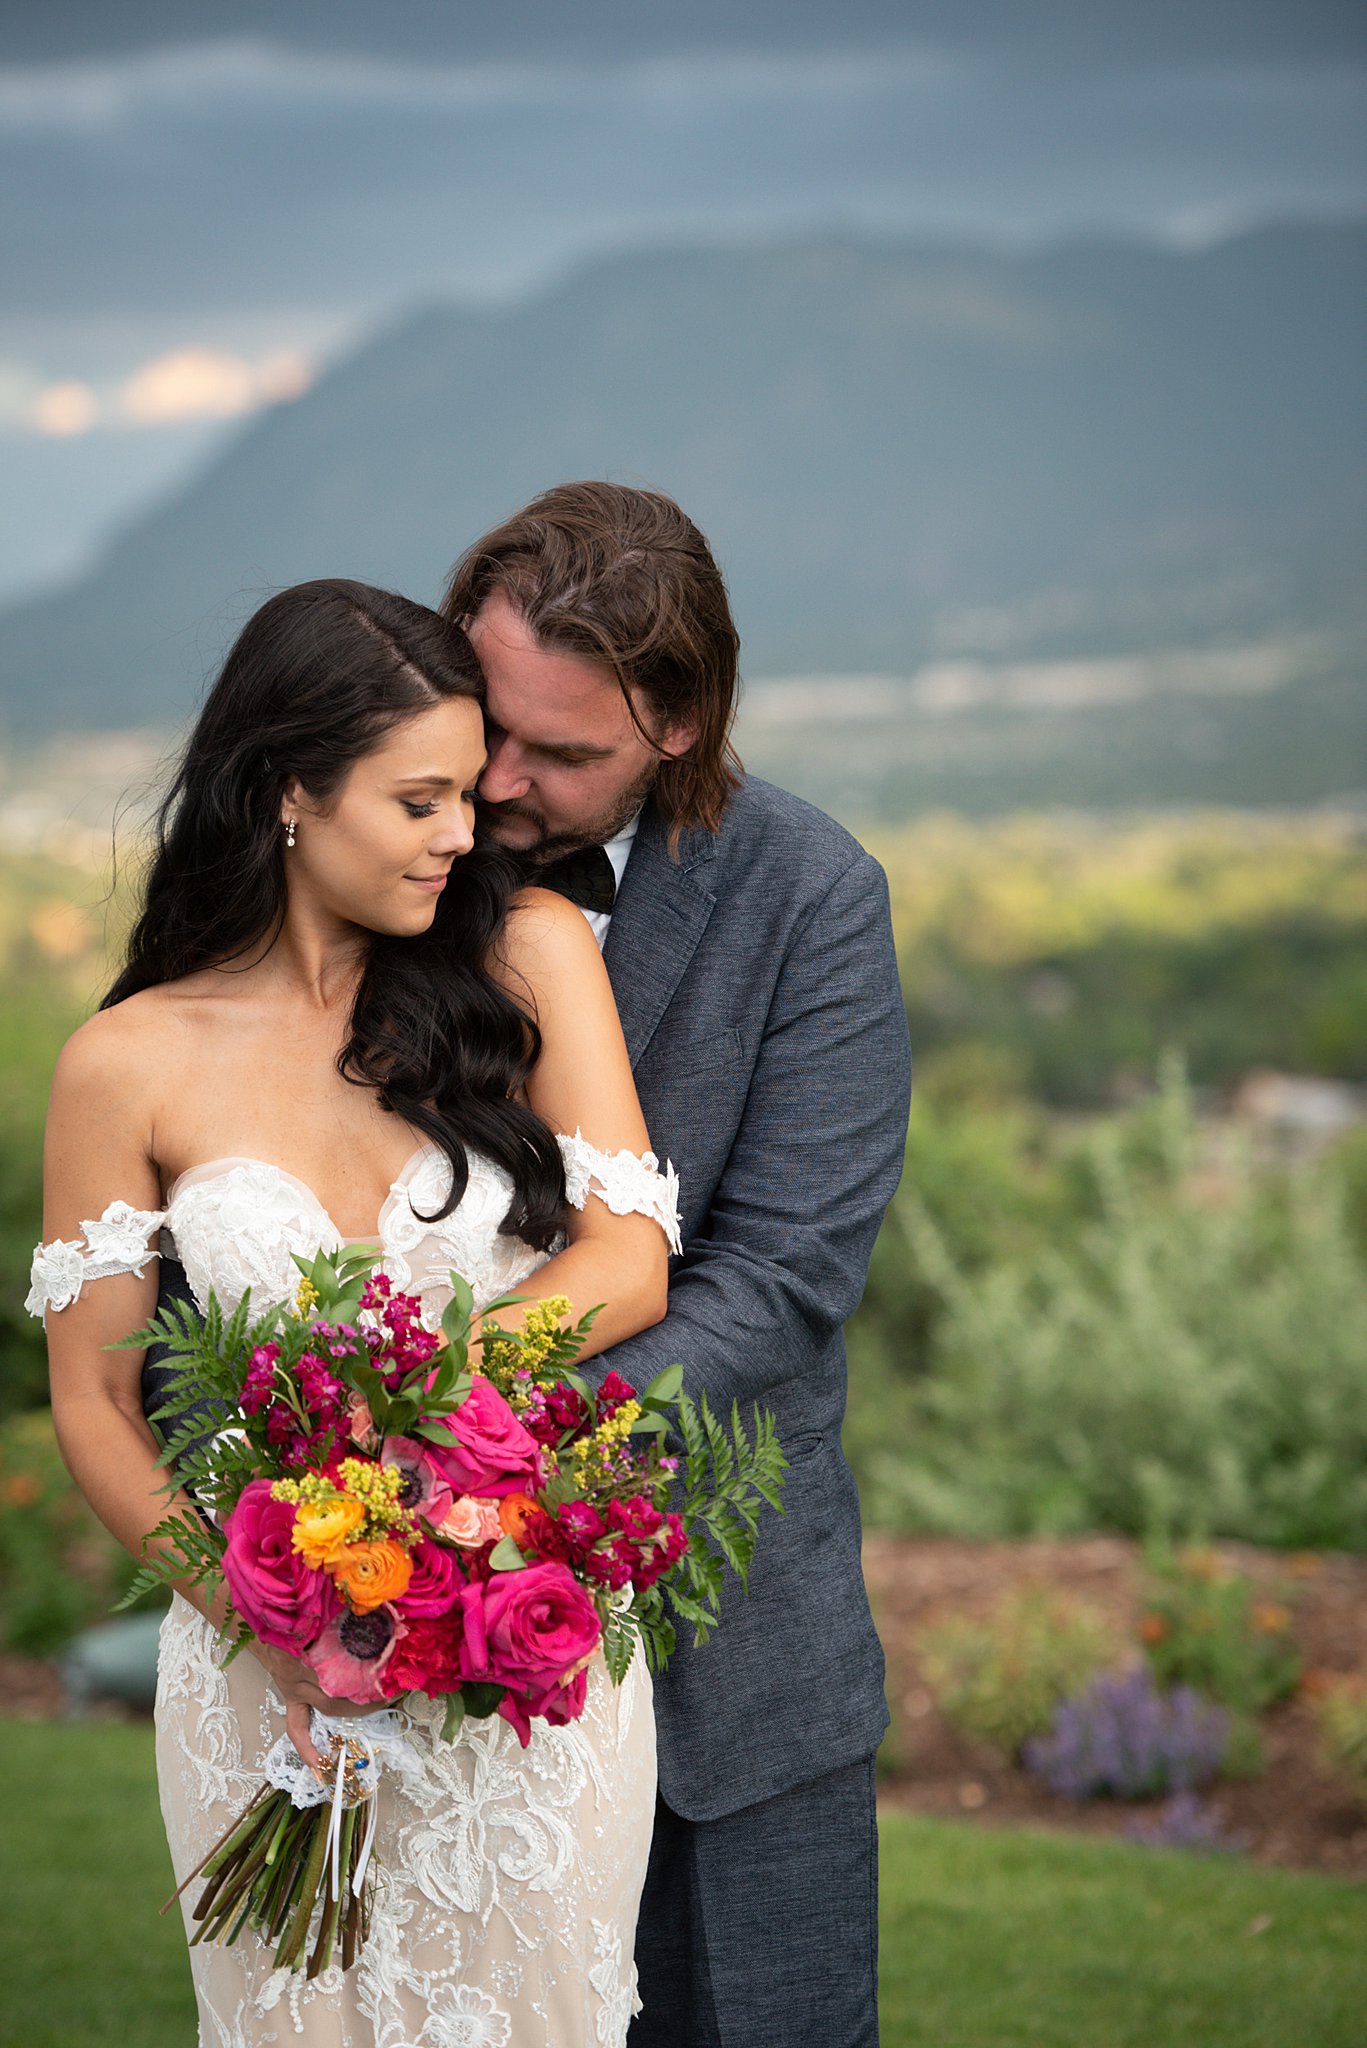 Newlyweds share an intimate moment in a mountain garden